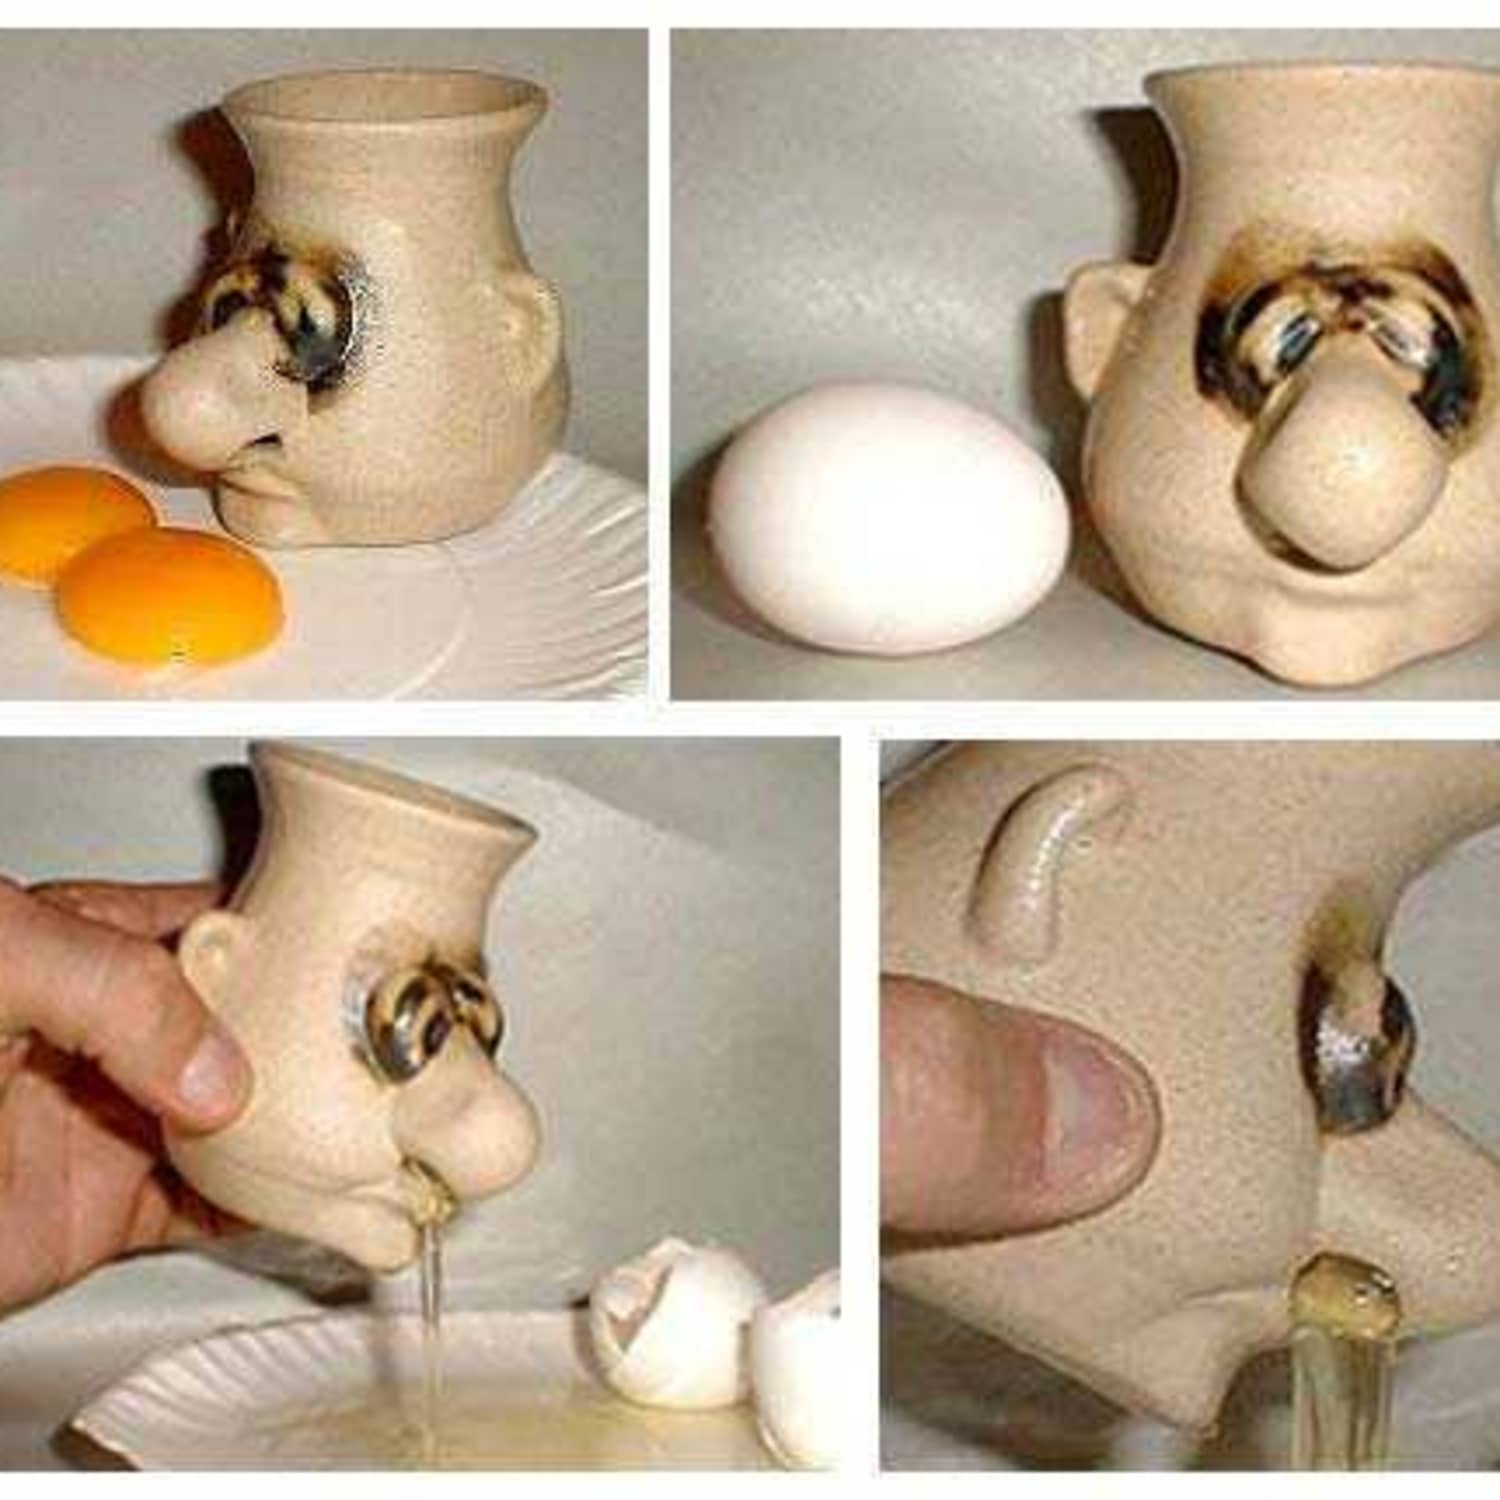 Egg Separator Funny Kitchen Gadget Fun Snot Nose Egg Separator Tool Useful For Cooking And Baking